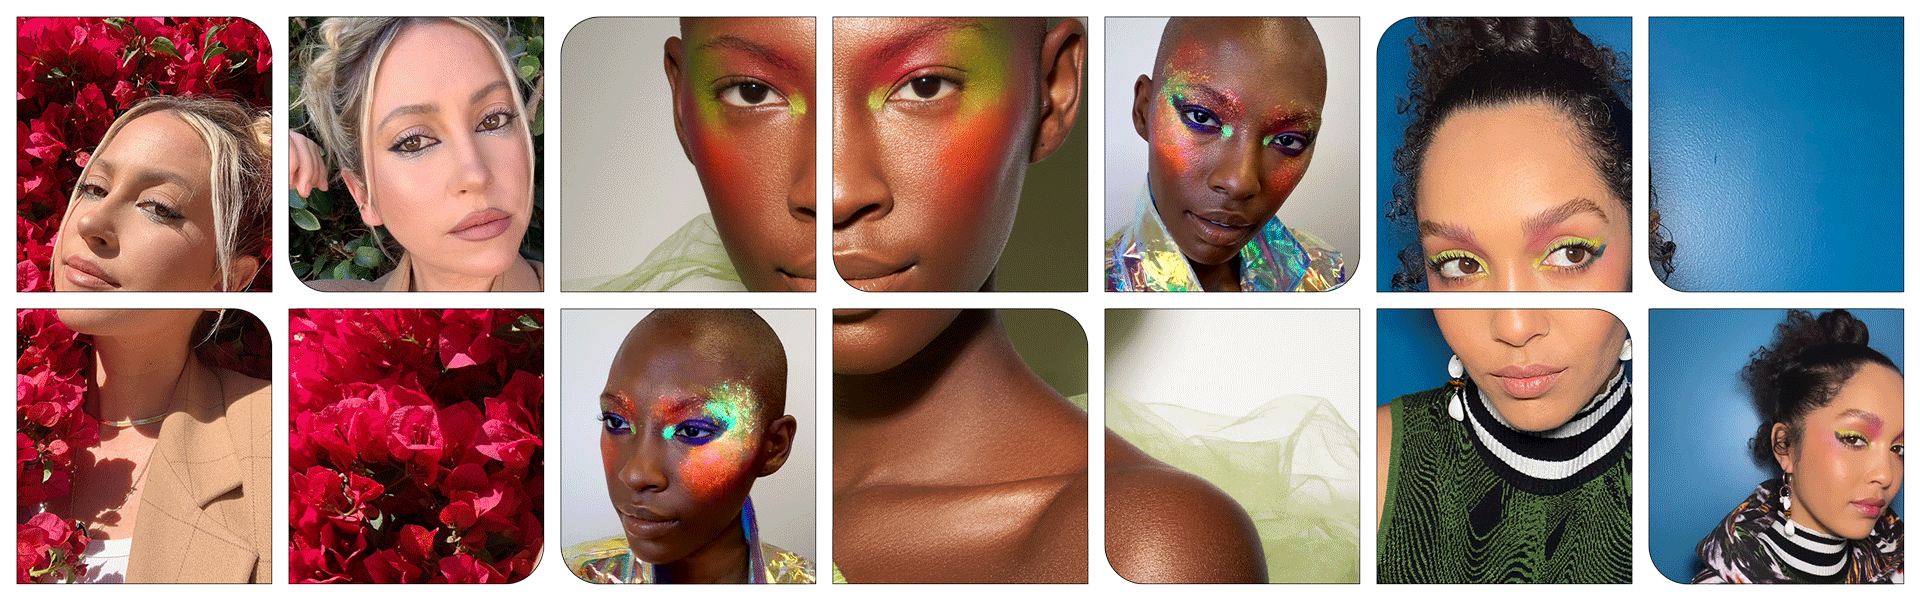 Runway Fantasy: 3 Epic Makeup Looks to Try This Spring